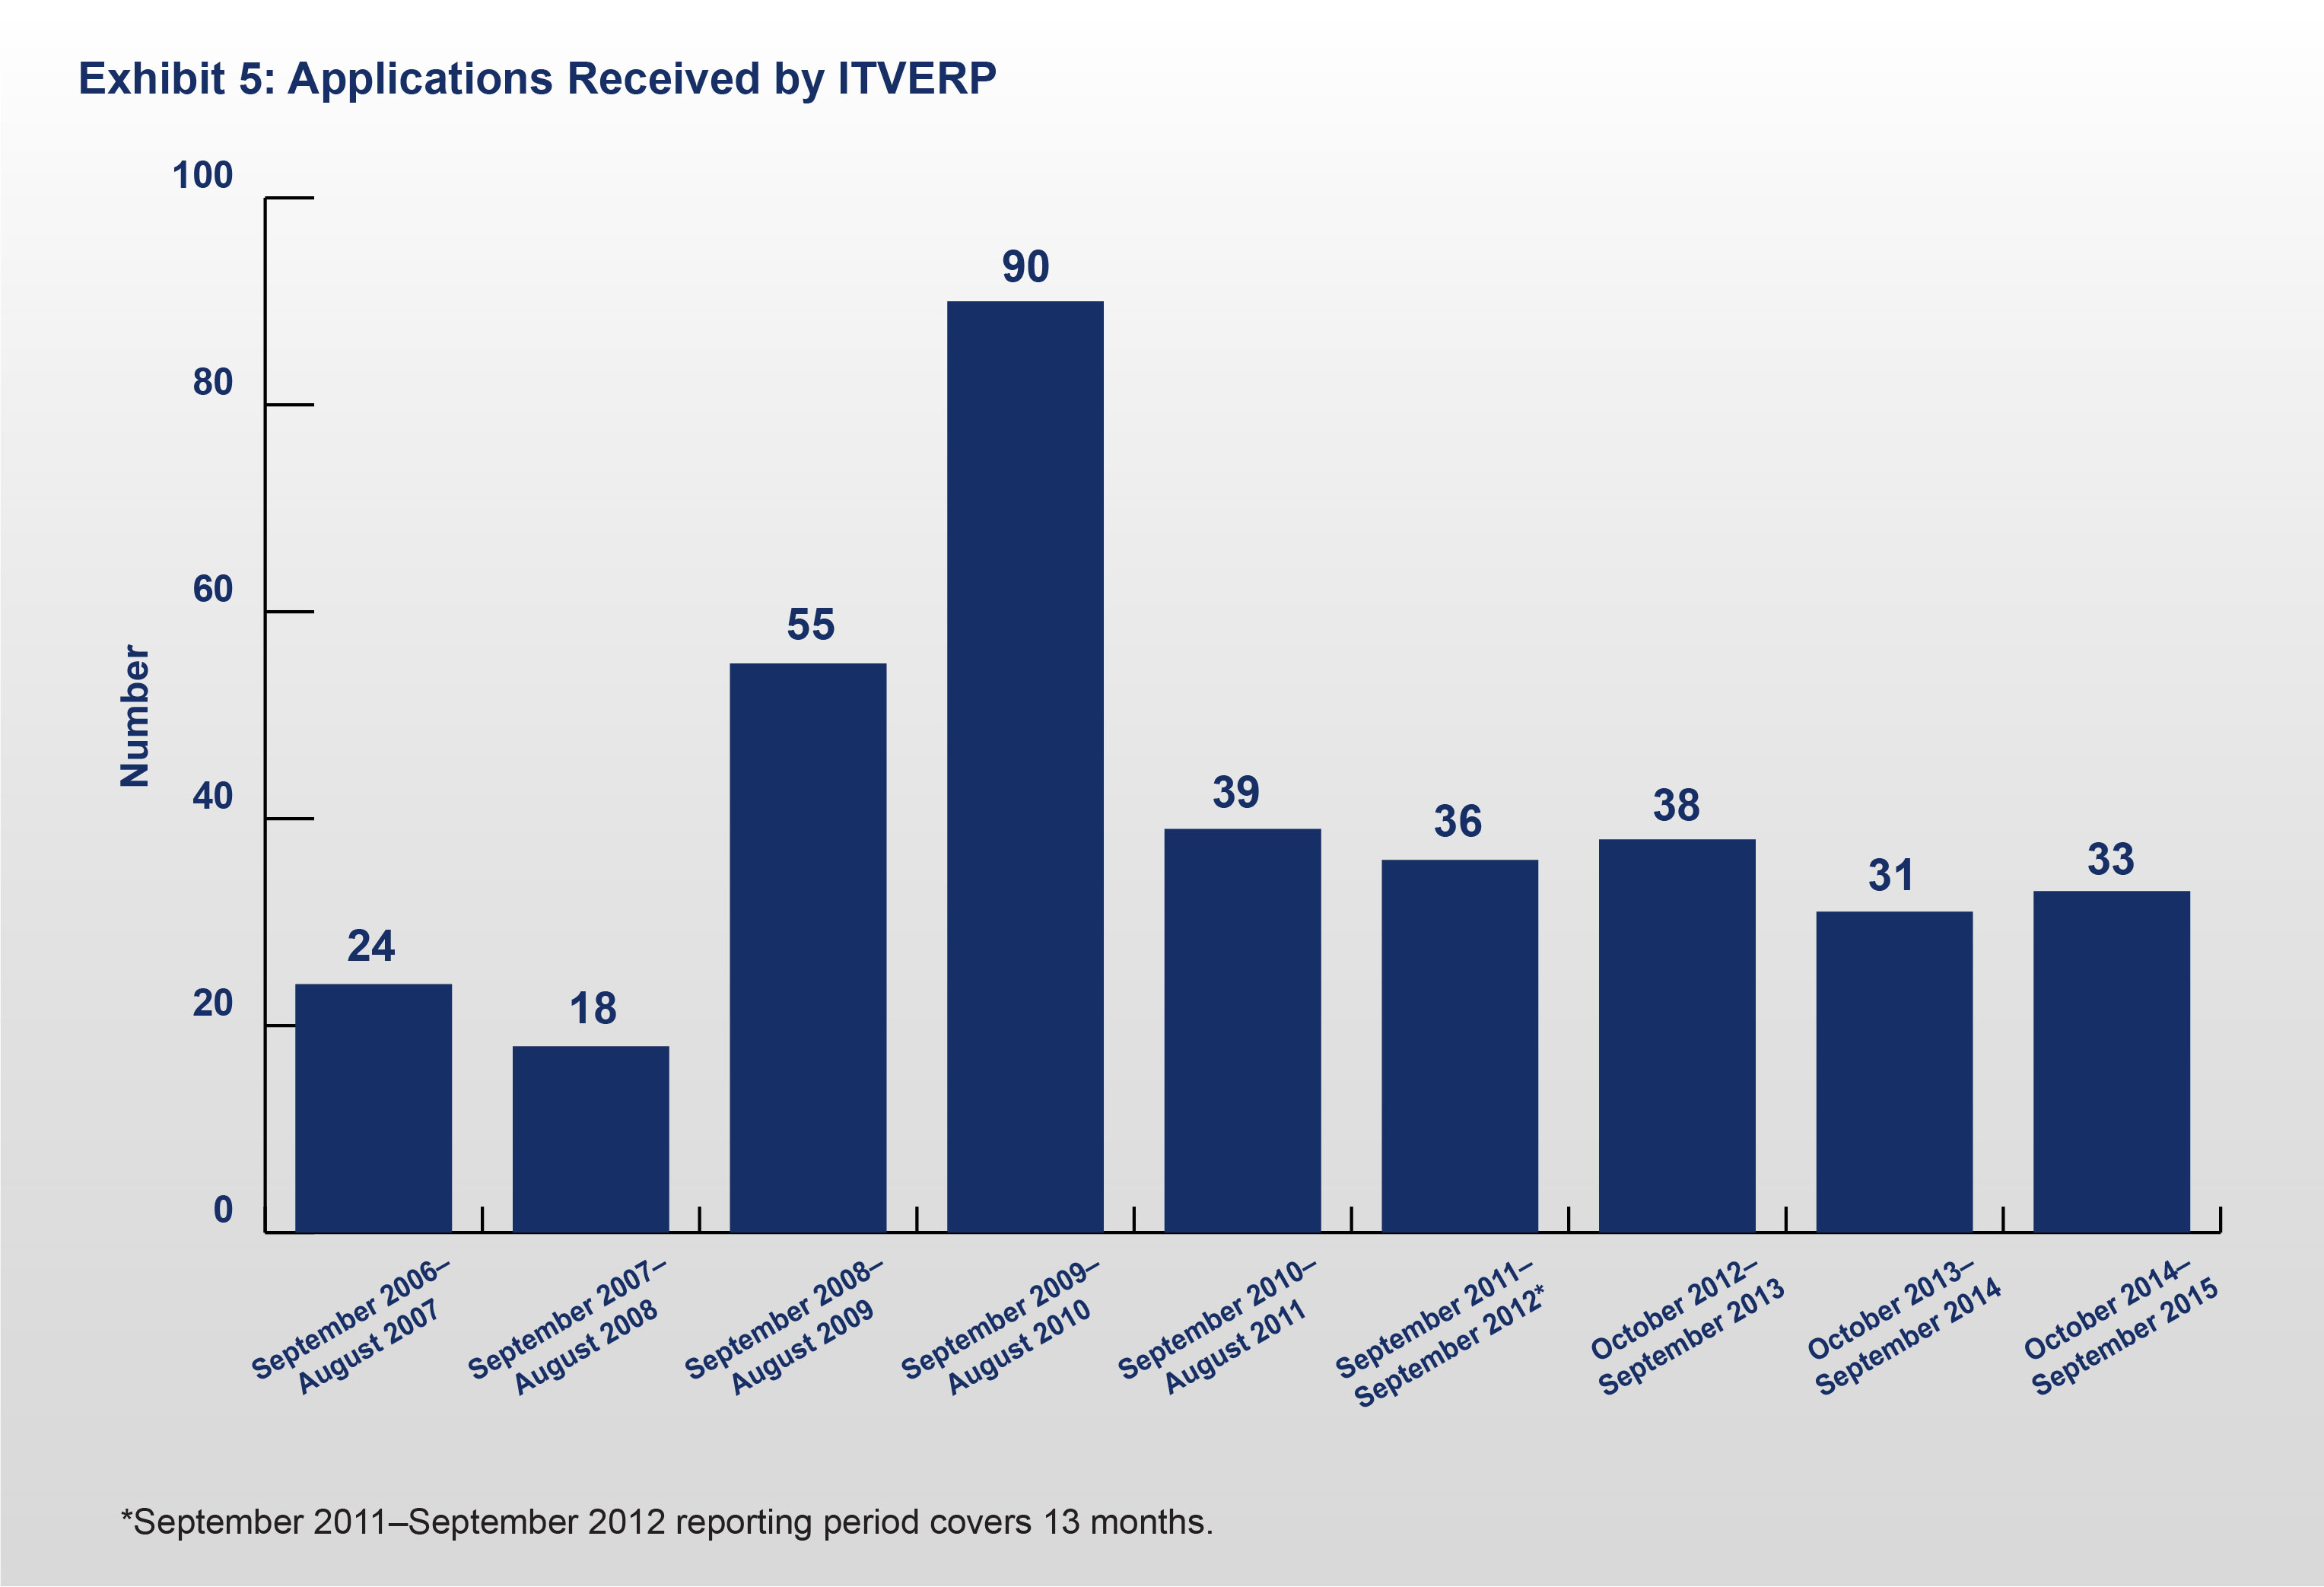 Exhibit 5: Applications Received by ITVERP (As of September 2015)